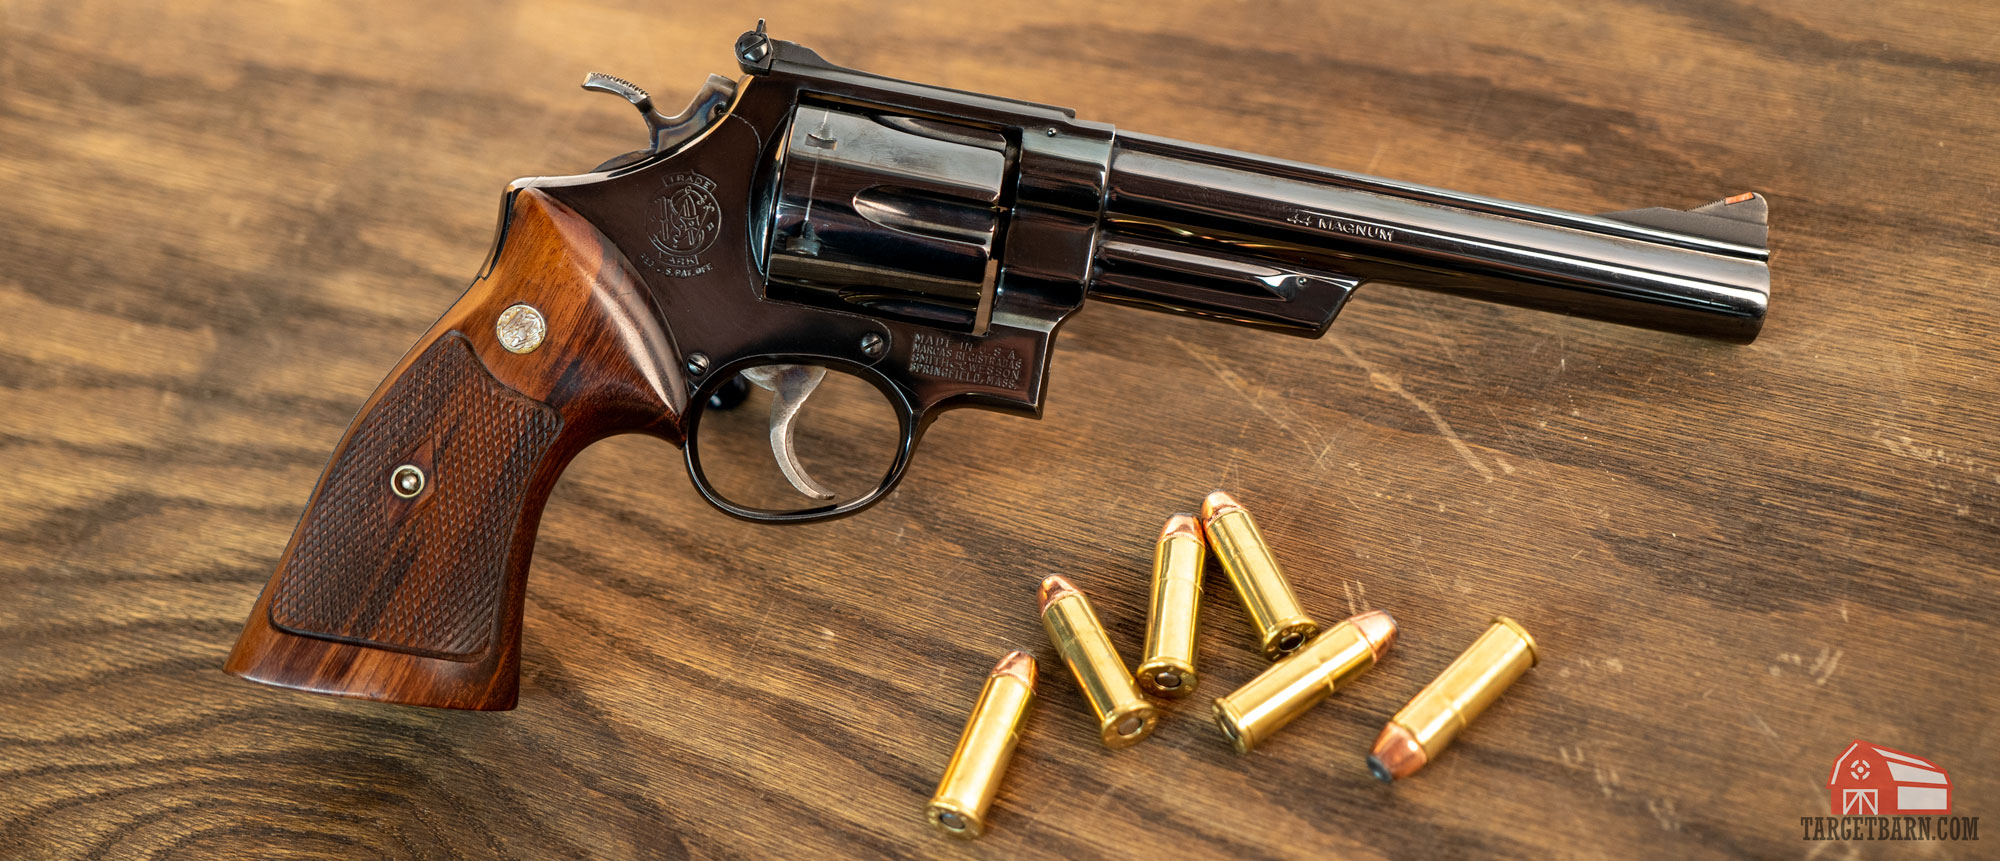 a smith and wesson model 29 revolver with 44 magnum ammo